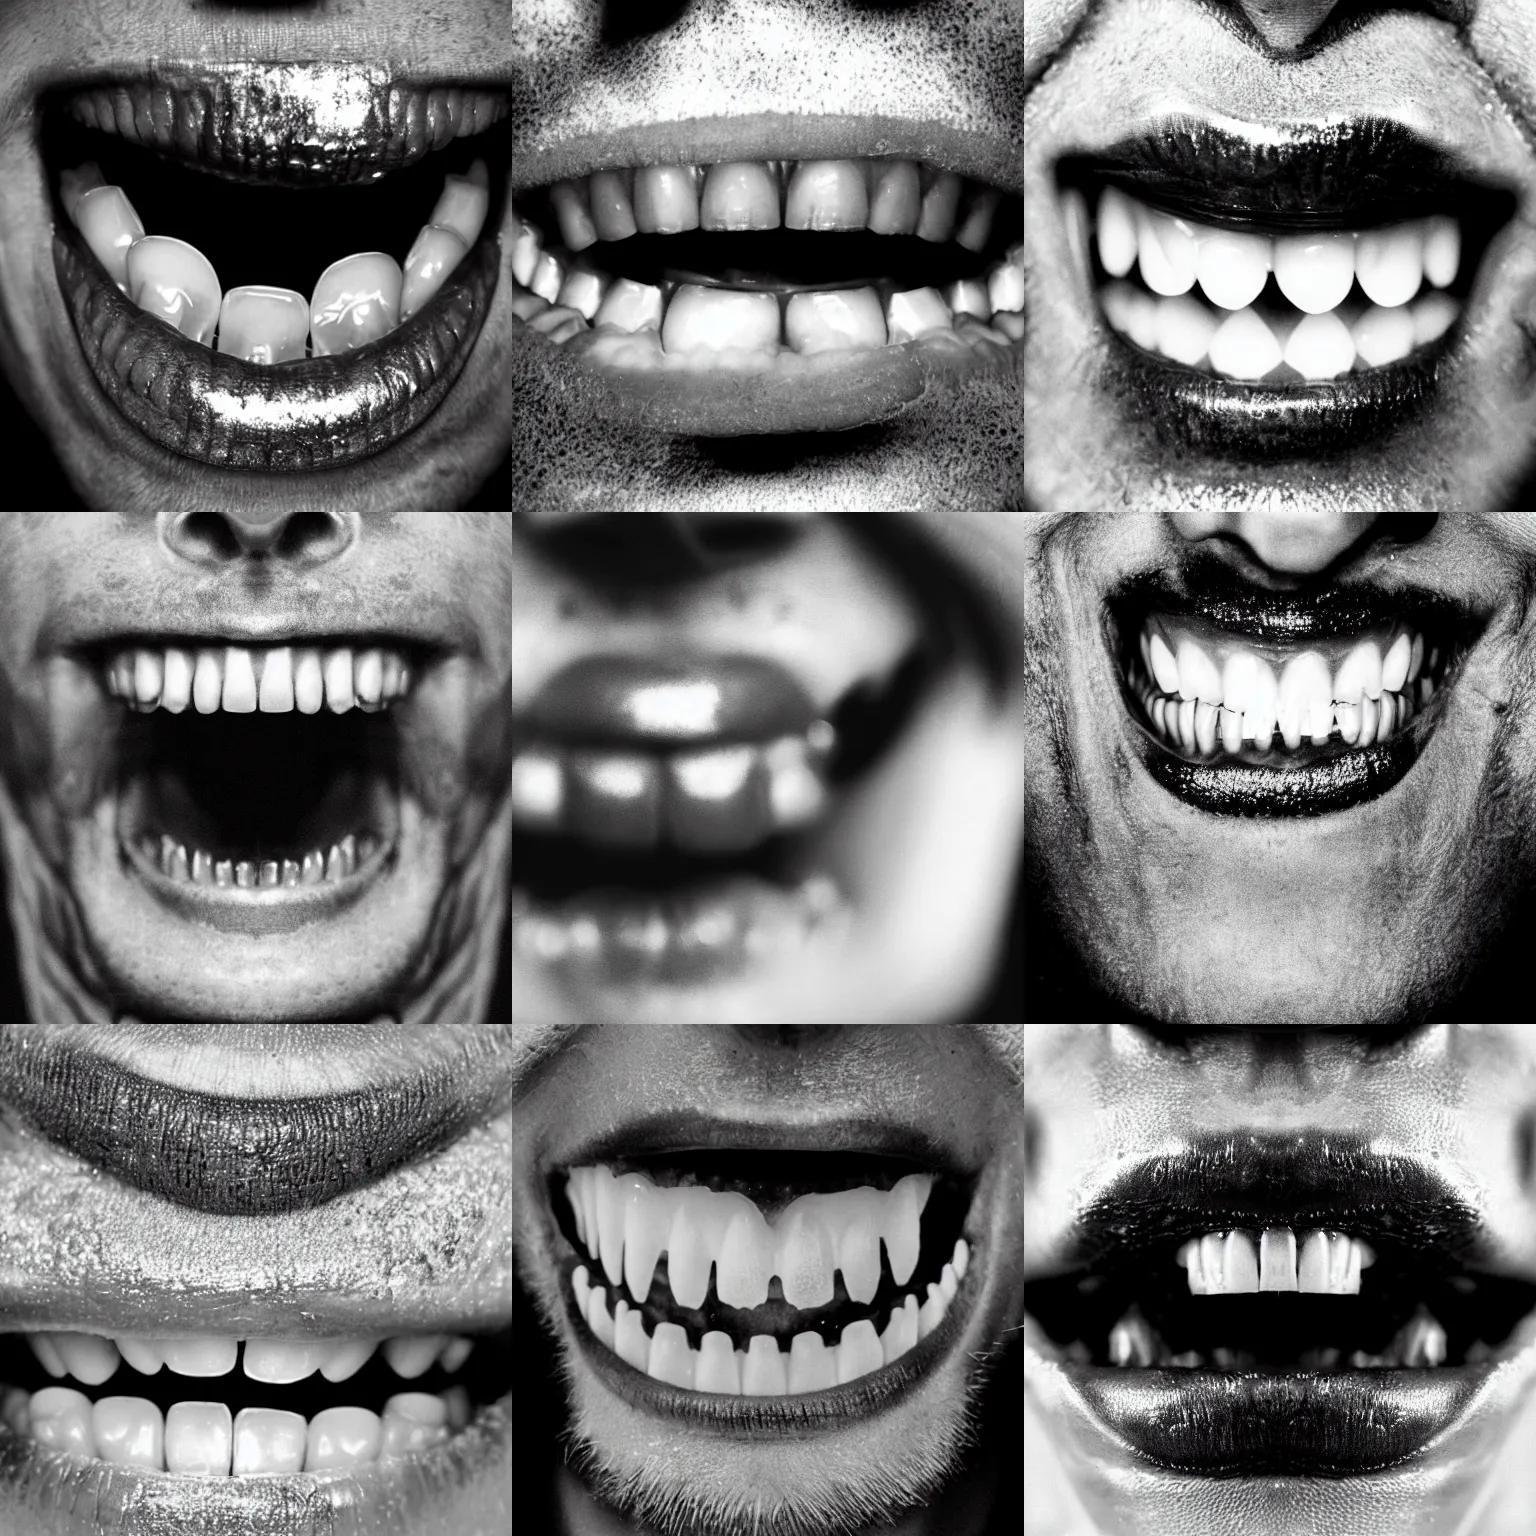 Prompt: close up man's mouth with metallic teeth, gritty grainy black and white expired film photograph, experimental album artwork